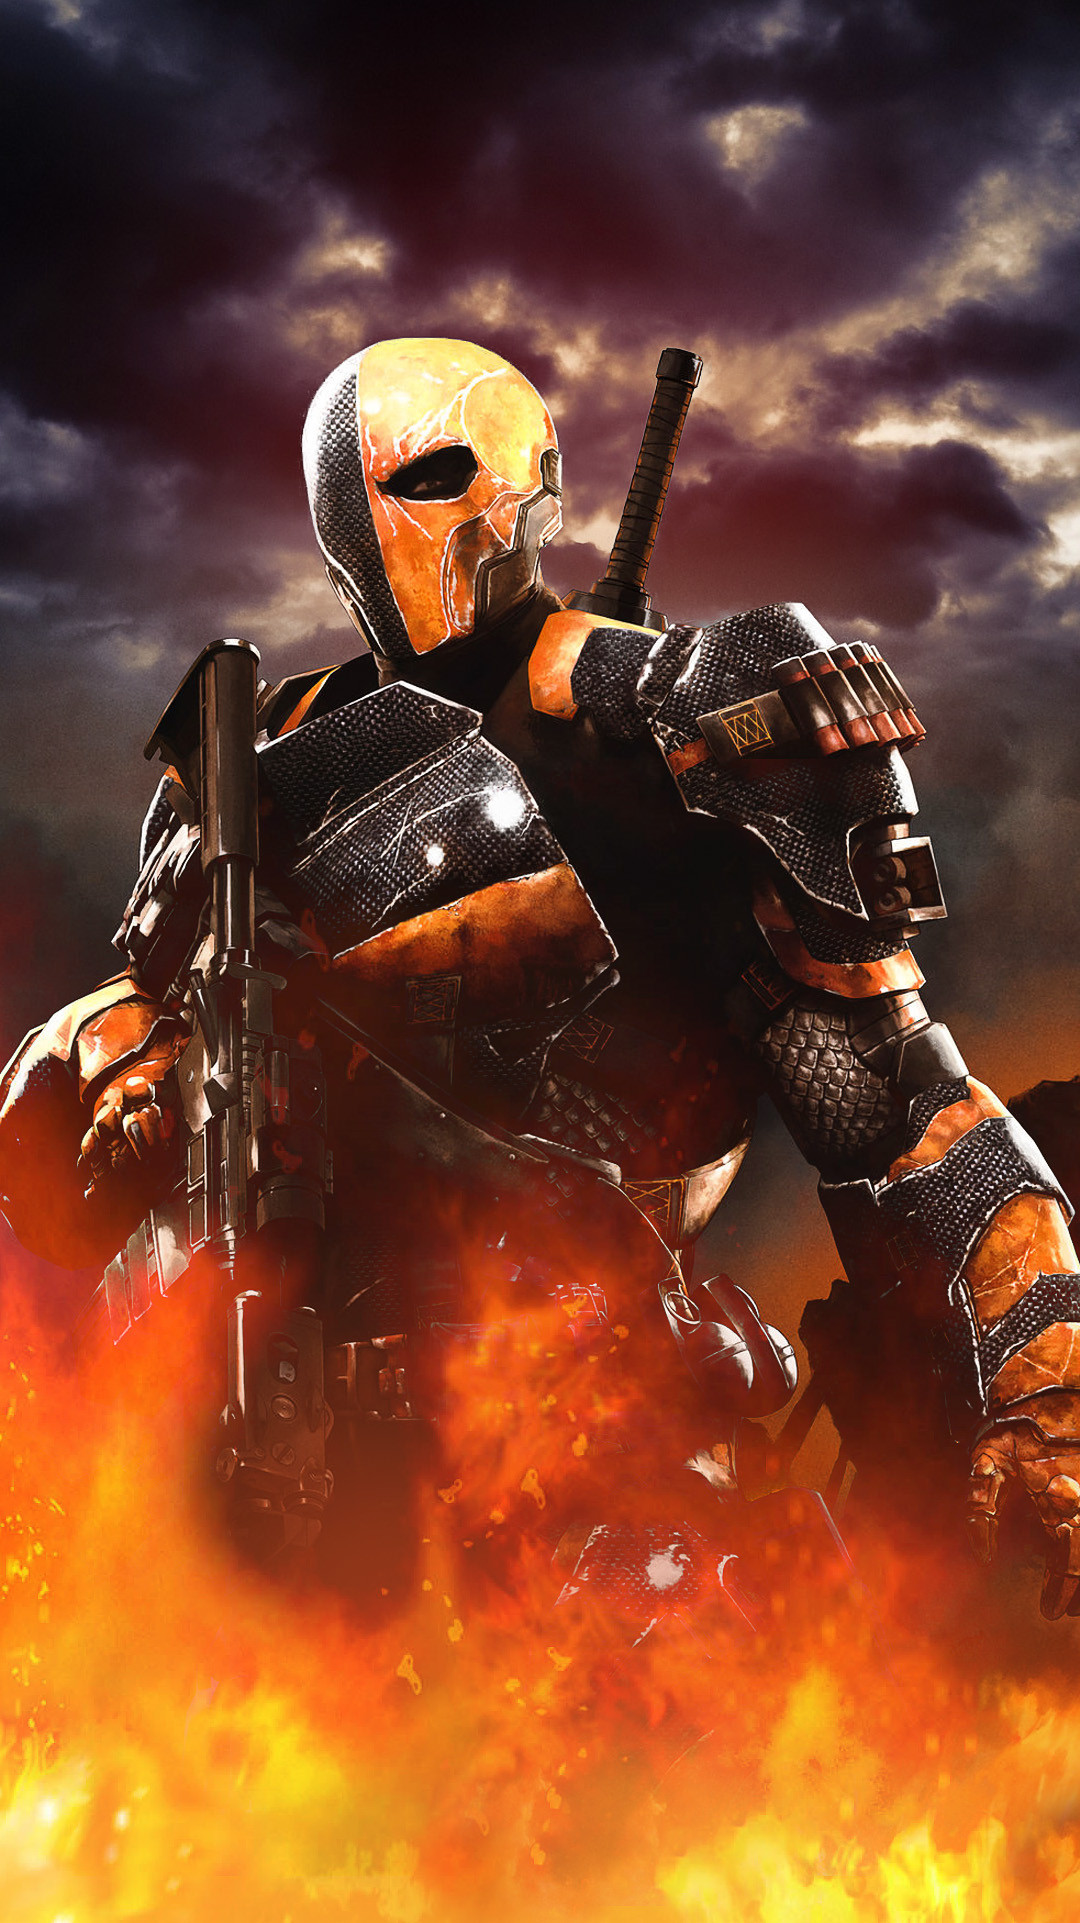 Deathstroke – Made it for my Galaxy s5 1080 x 1920